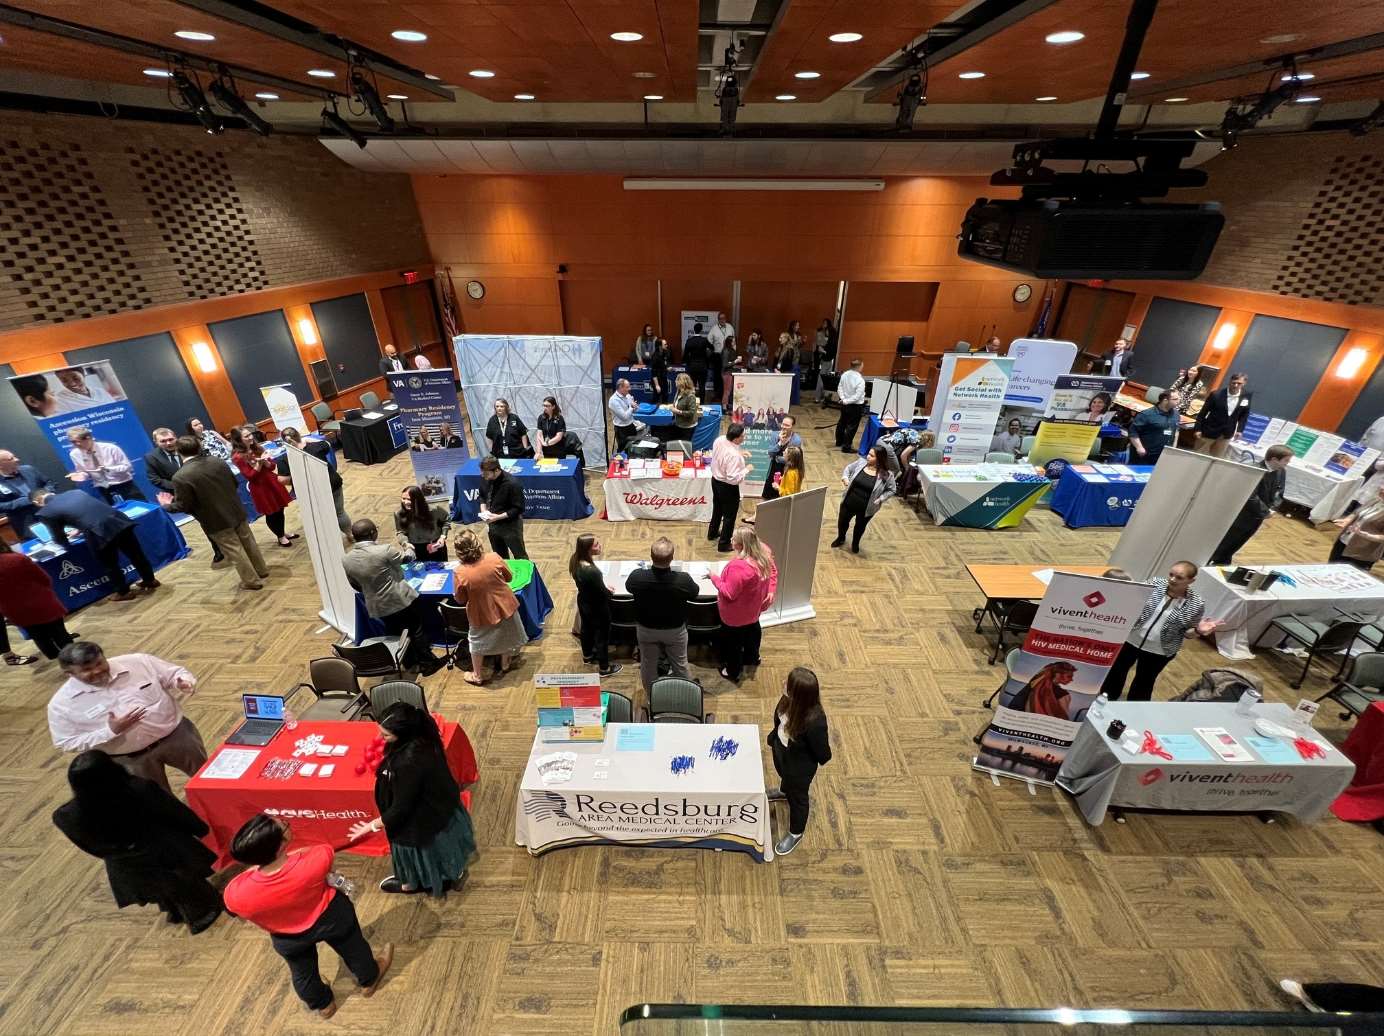 Pharmacy students explore career opportunities at Experiential Education Expo